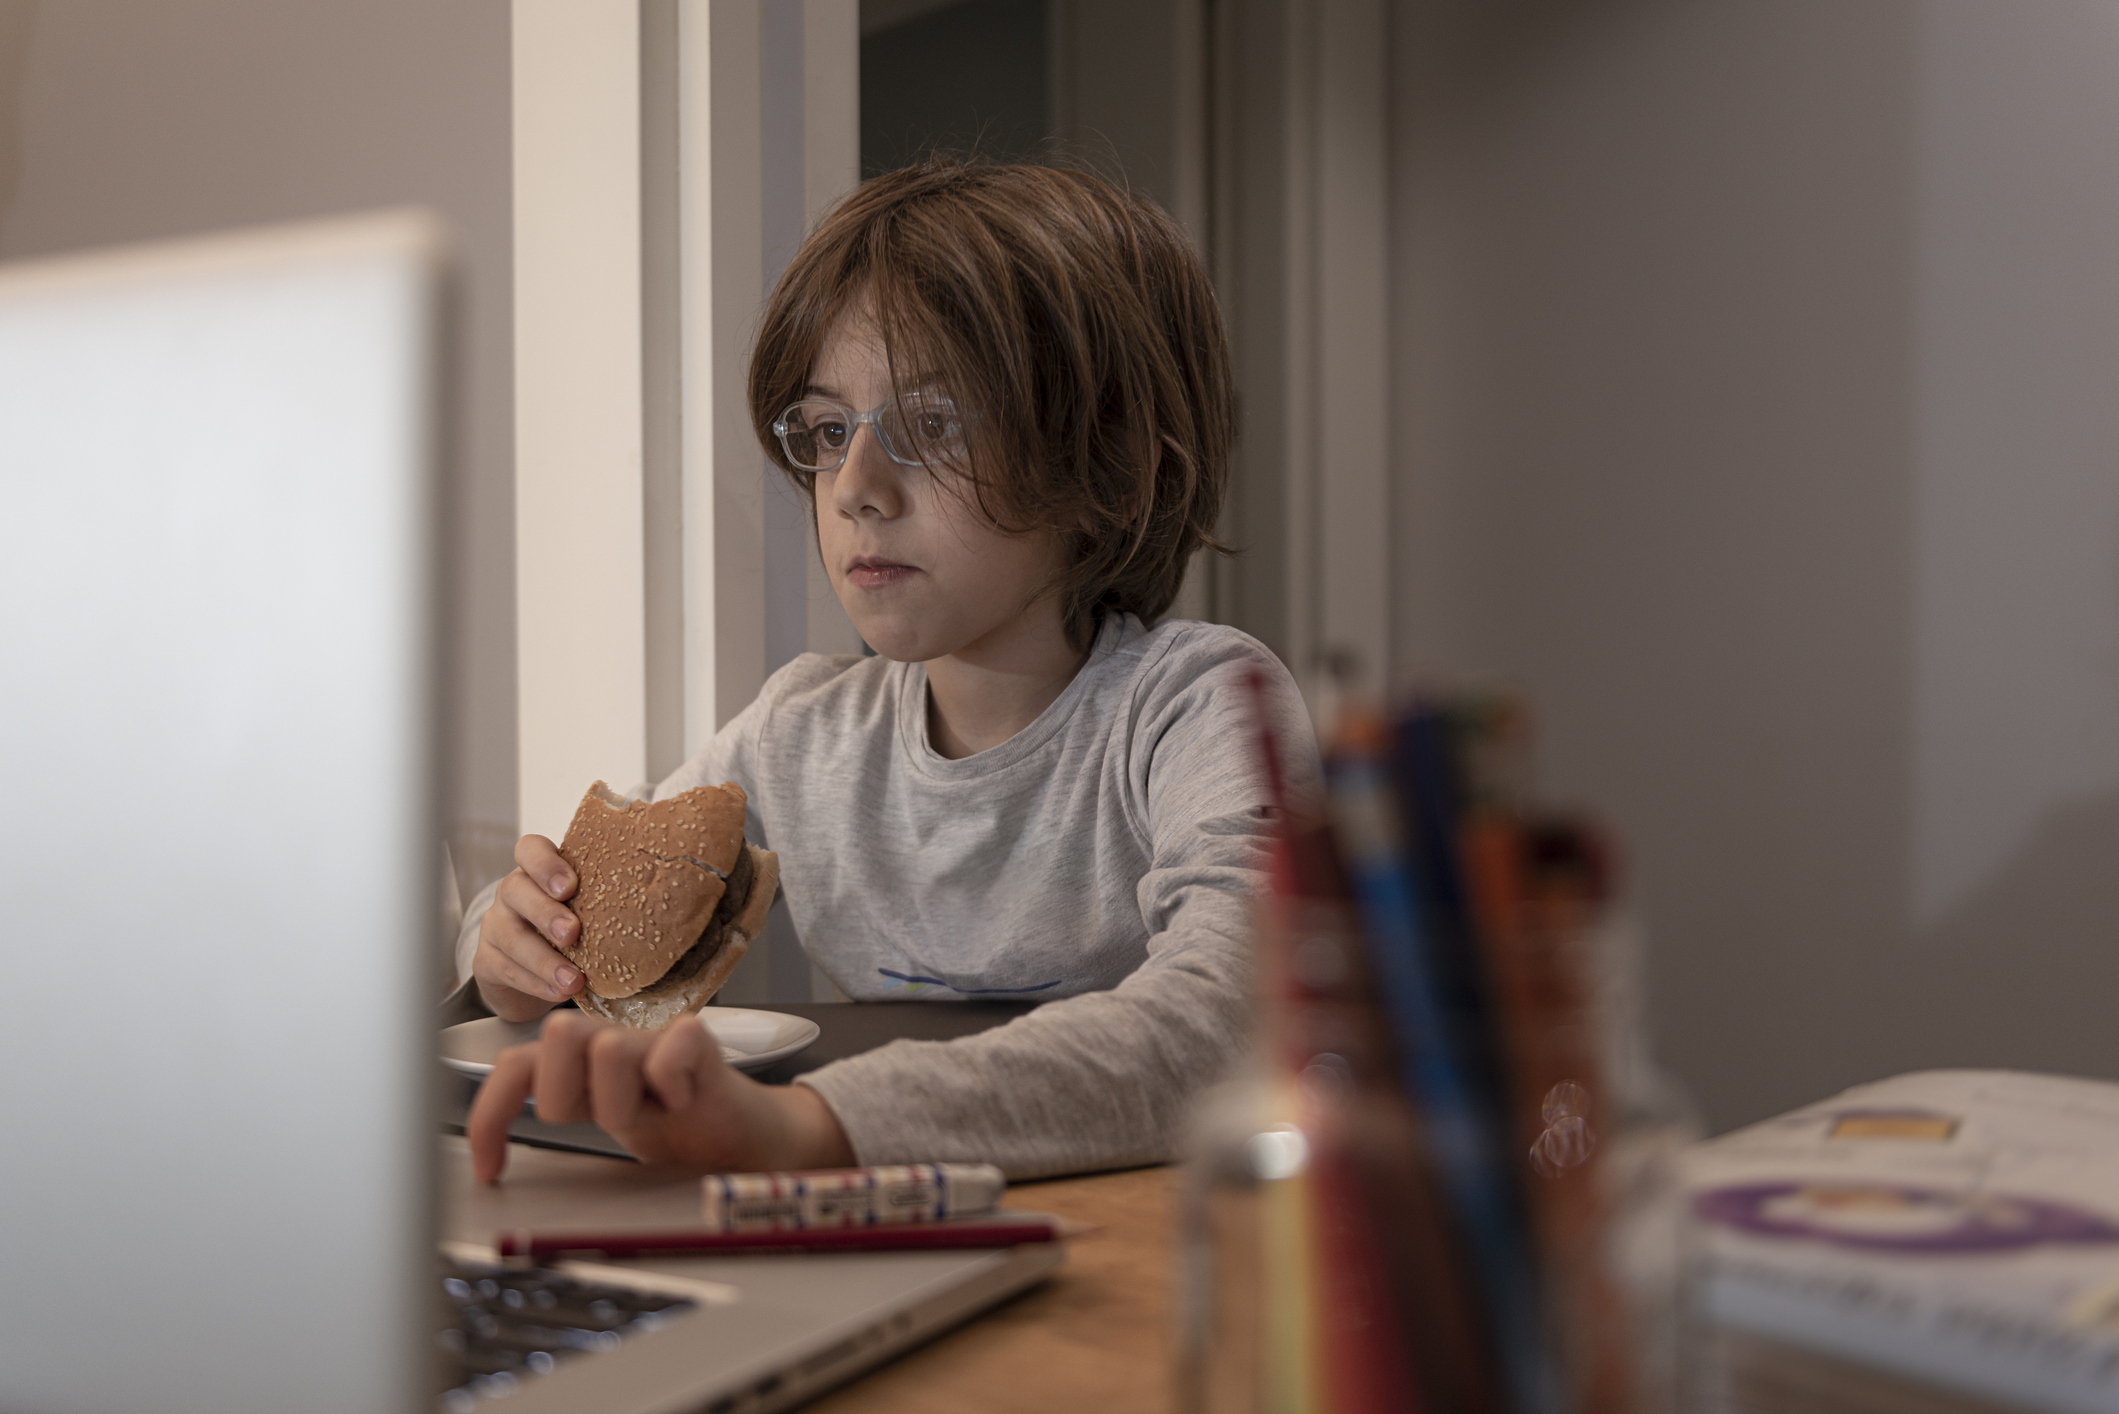 Little boy eating hamburger and during COVID-19 quarantine attending to online school class from his room.